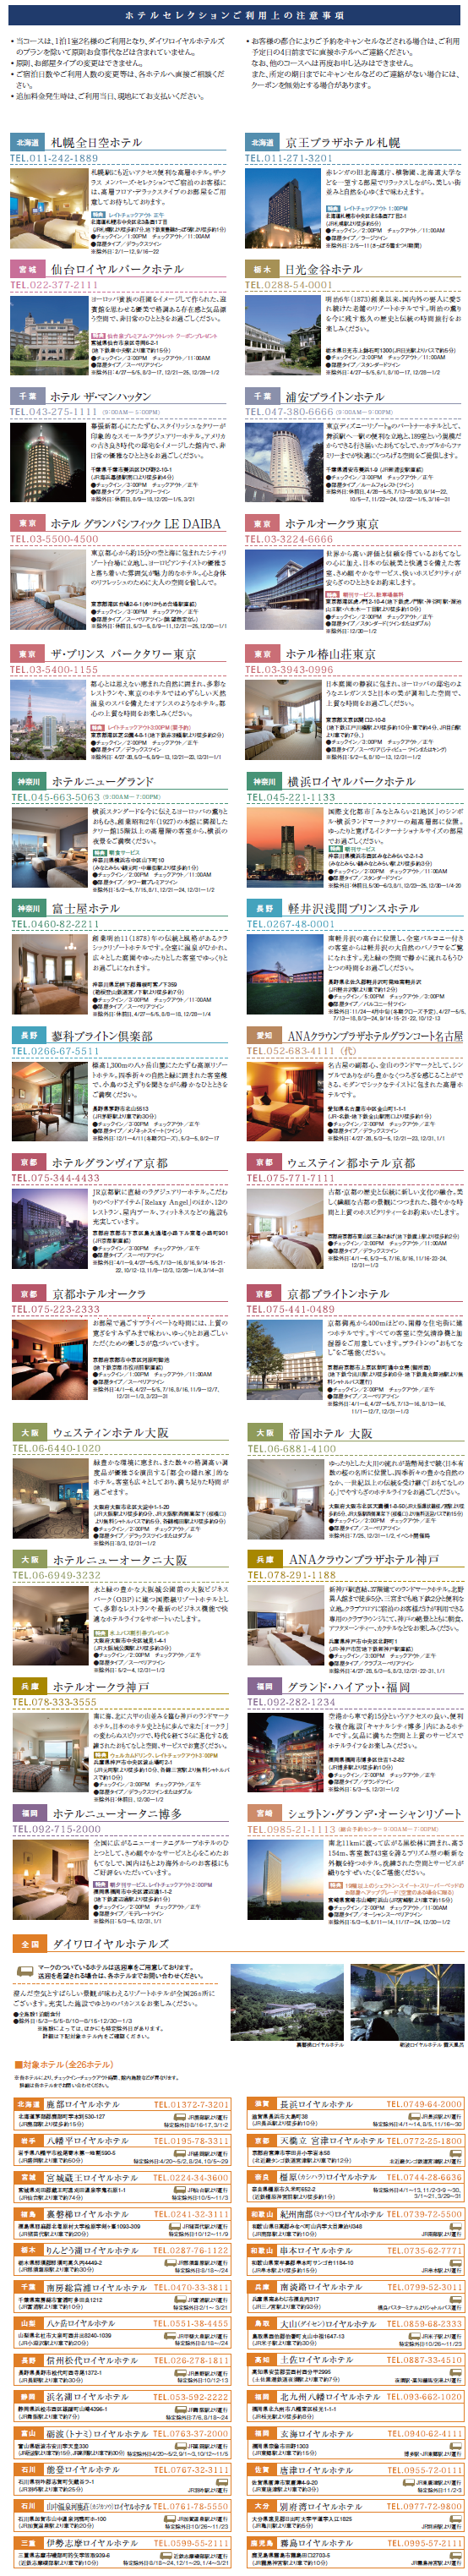 HOTEL SELECTION